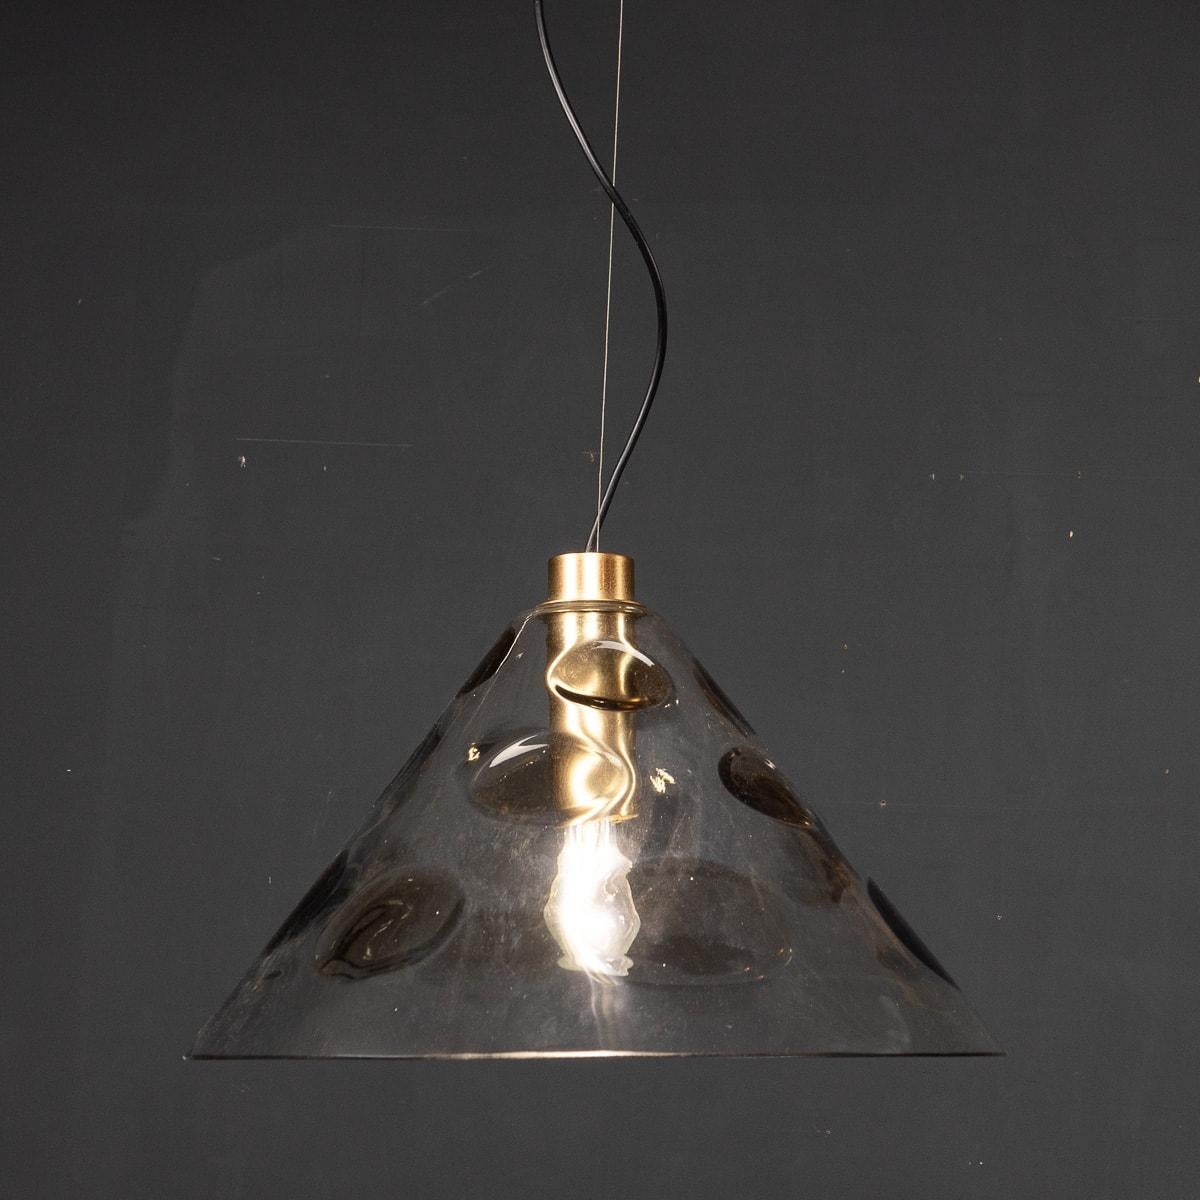 Mid 20th Century Italian Murano glass polka dot pendant light with brass fittings. This light was created in the iconic 1970’s.

CONDITION
In Great Condition - wear consistent with age.

SIZE
Height: 32cm
Diameter: 40cm.